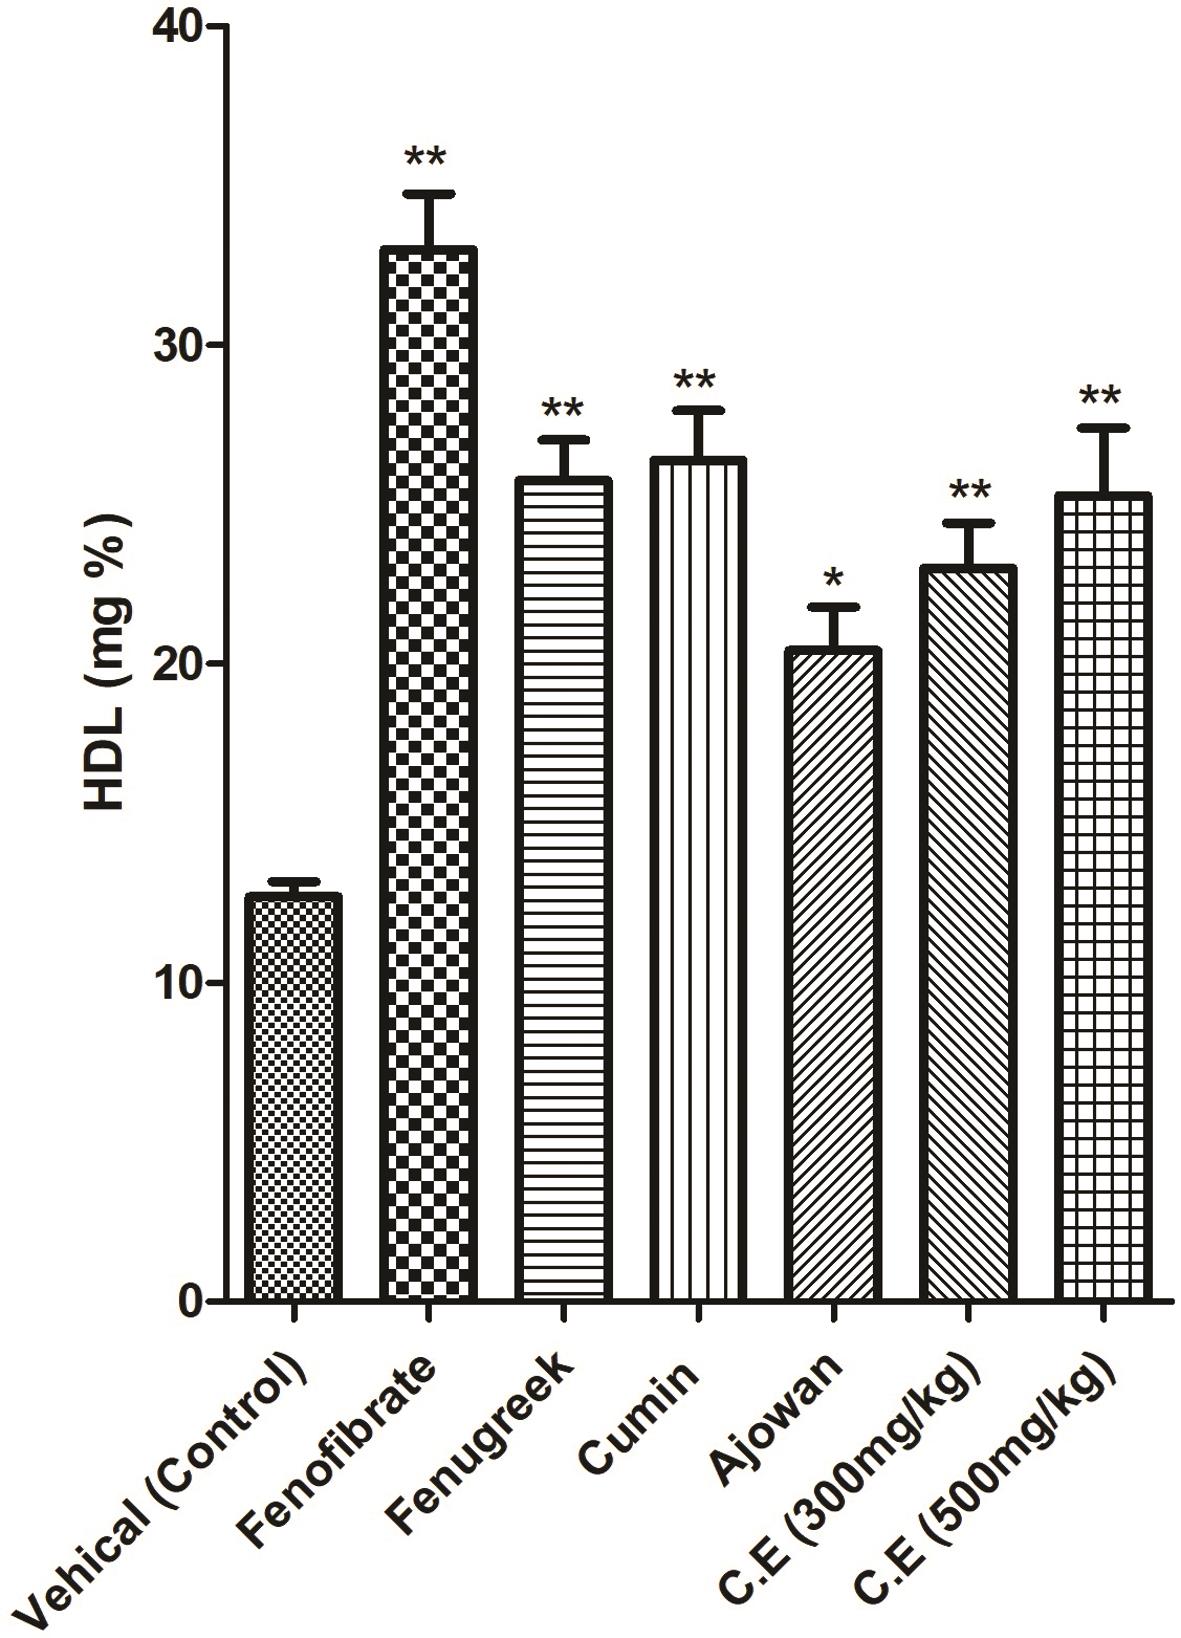 HDL (mg%) in various treated hypercholesterolemic rats.